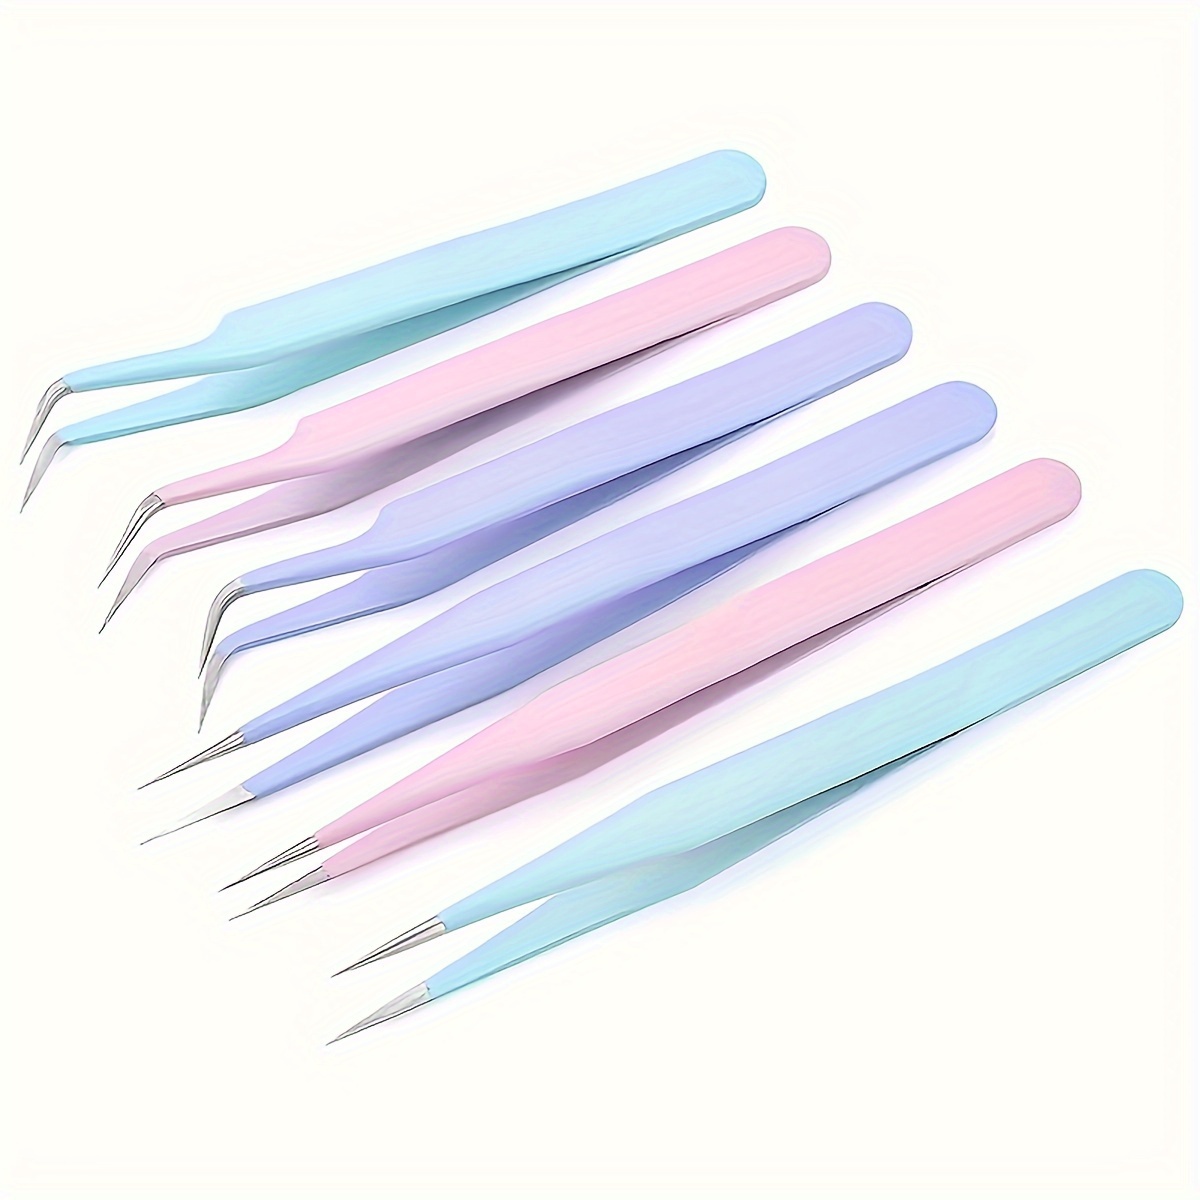 Precision Craft Tweezers Set,3 Pcs Pointed Tweezers,2 Pcs Curved Tweezers,2 Pcs Precision Serrated Tweezers for Eyelash Extensions,Craft, Jewelry